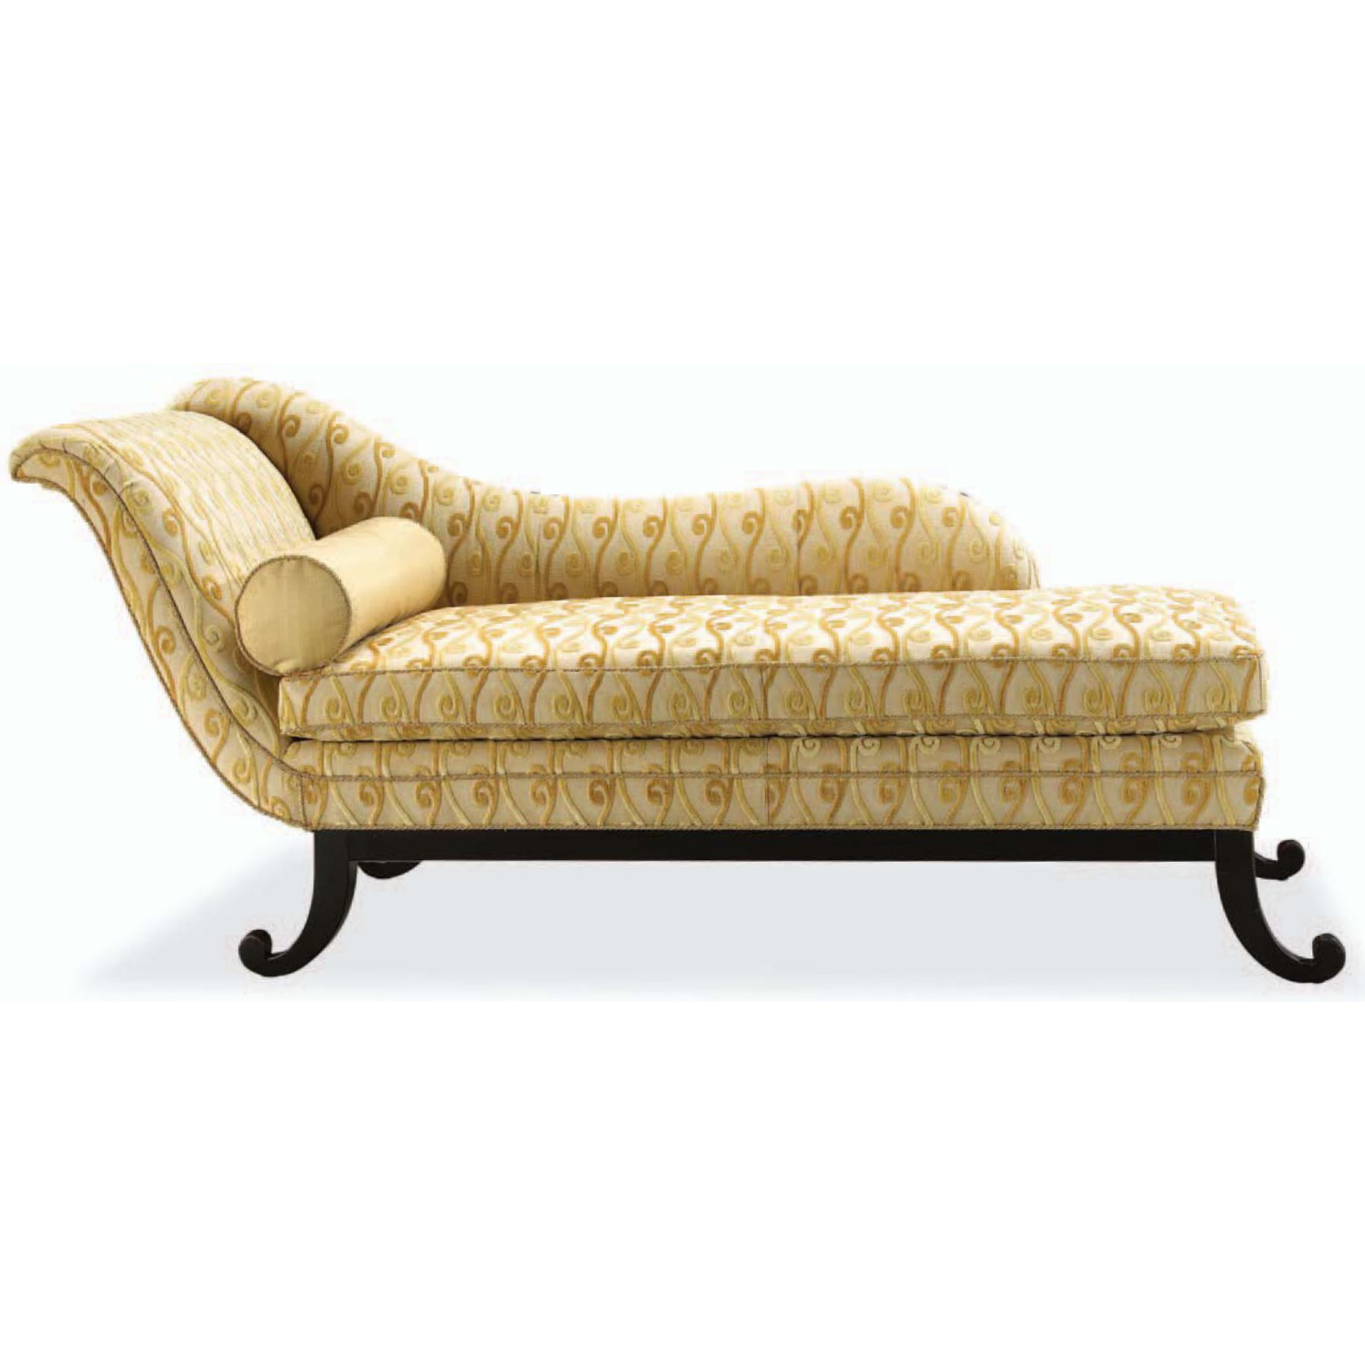 Fainting couch fr01f870ca LIKGBEY